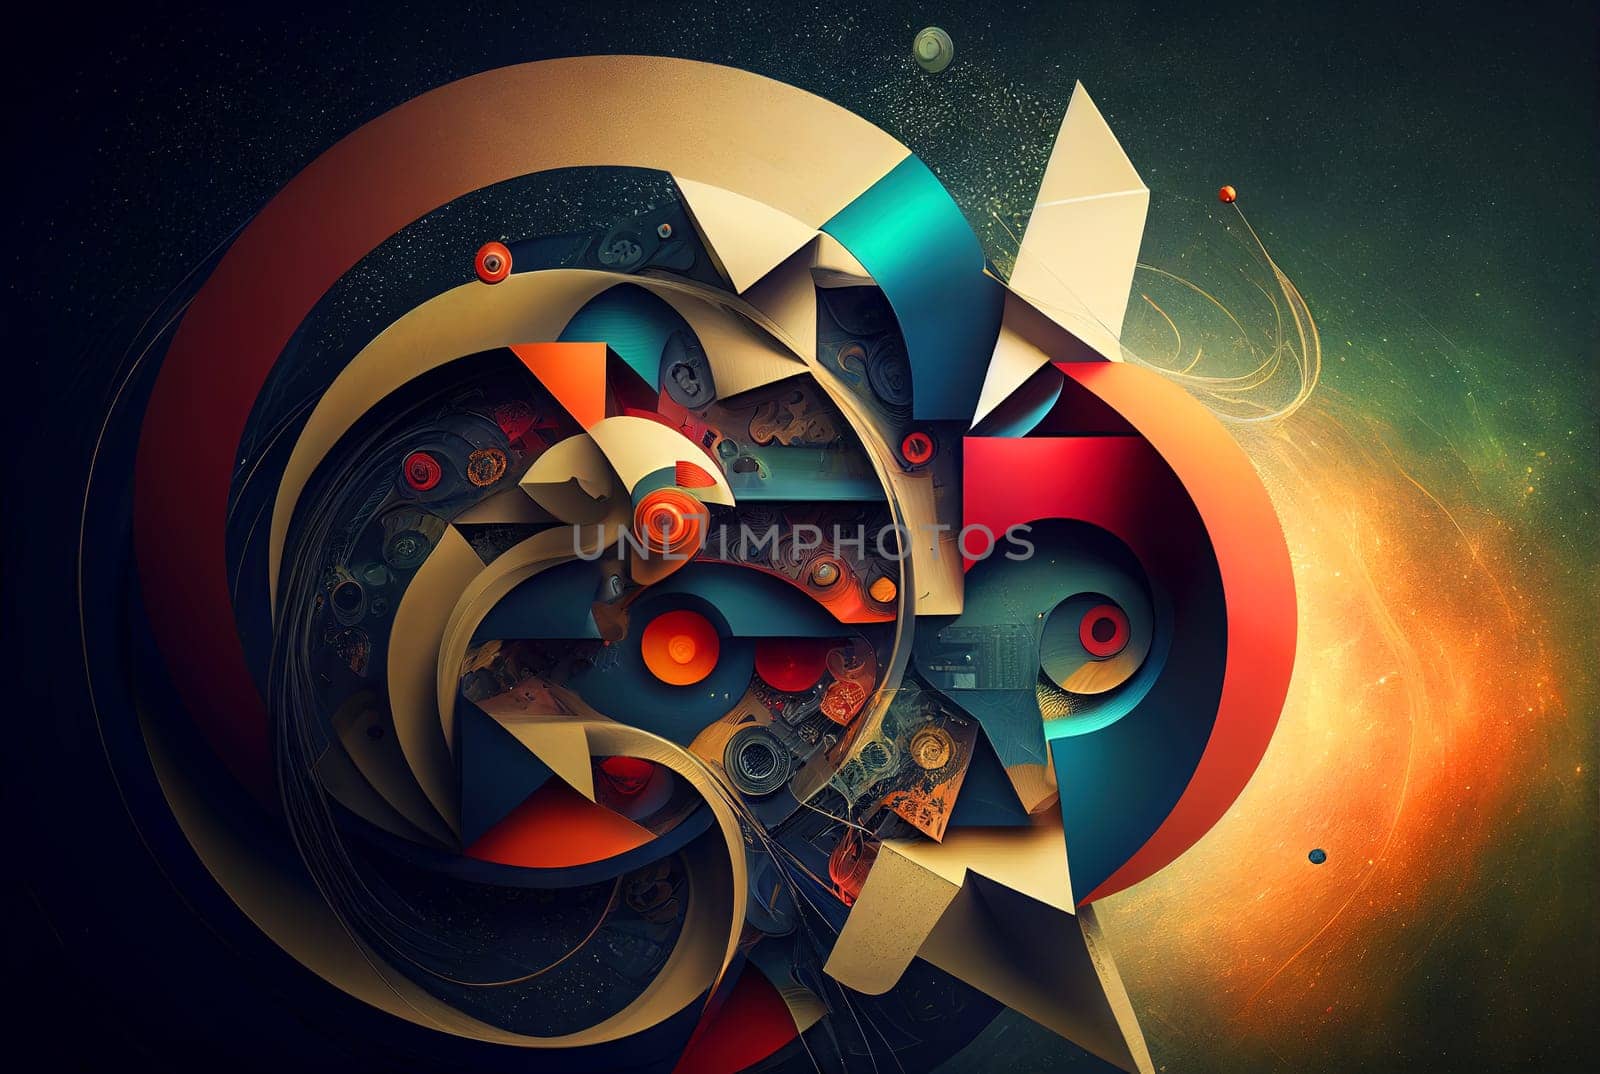 Abstract shapes retro composition in 20s avantrgarde or futurism style. Retro background with surreal mindbending figures. Generated AI